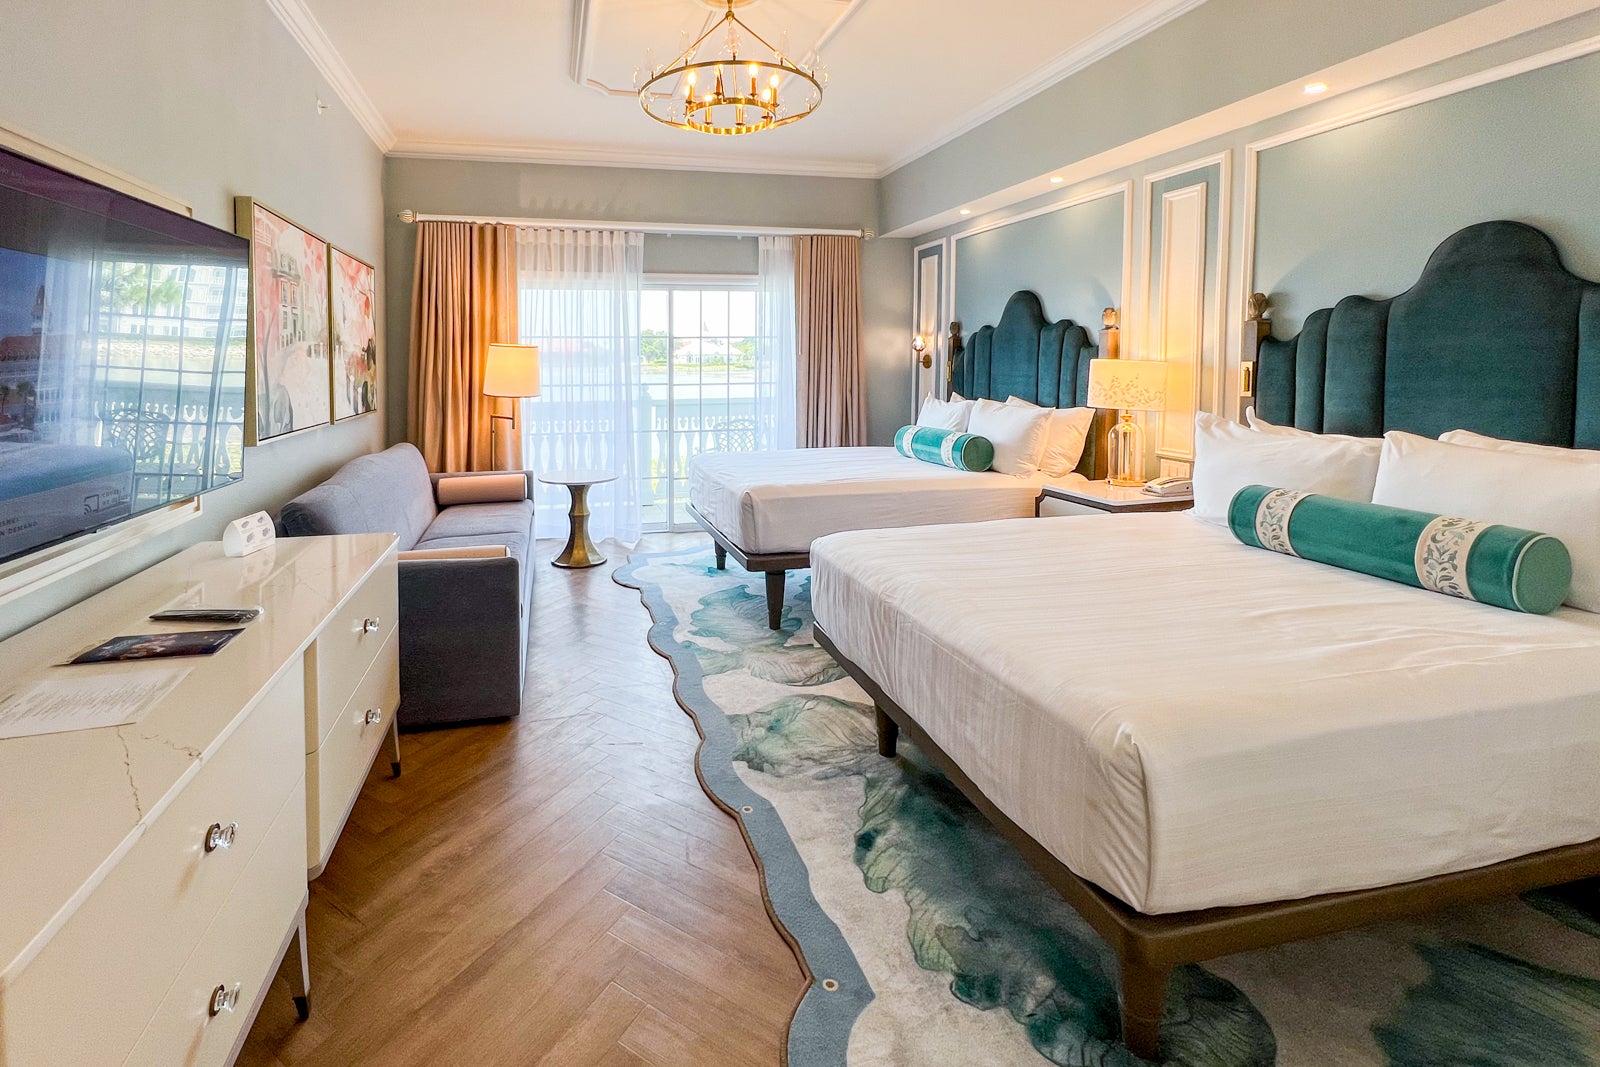 These are the best Disney hotels in 2023